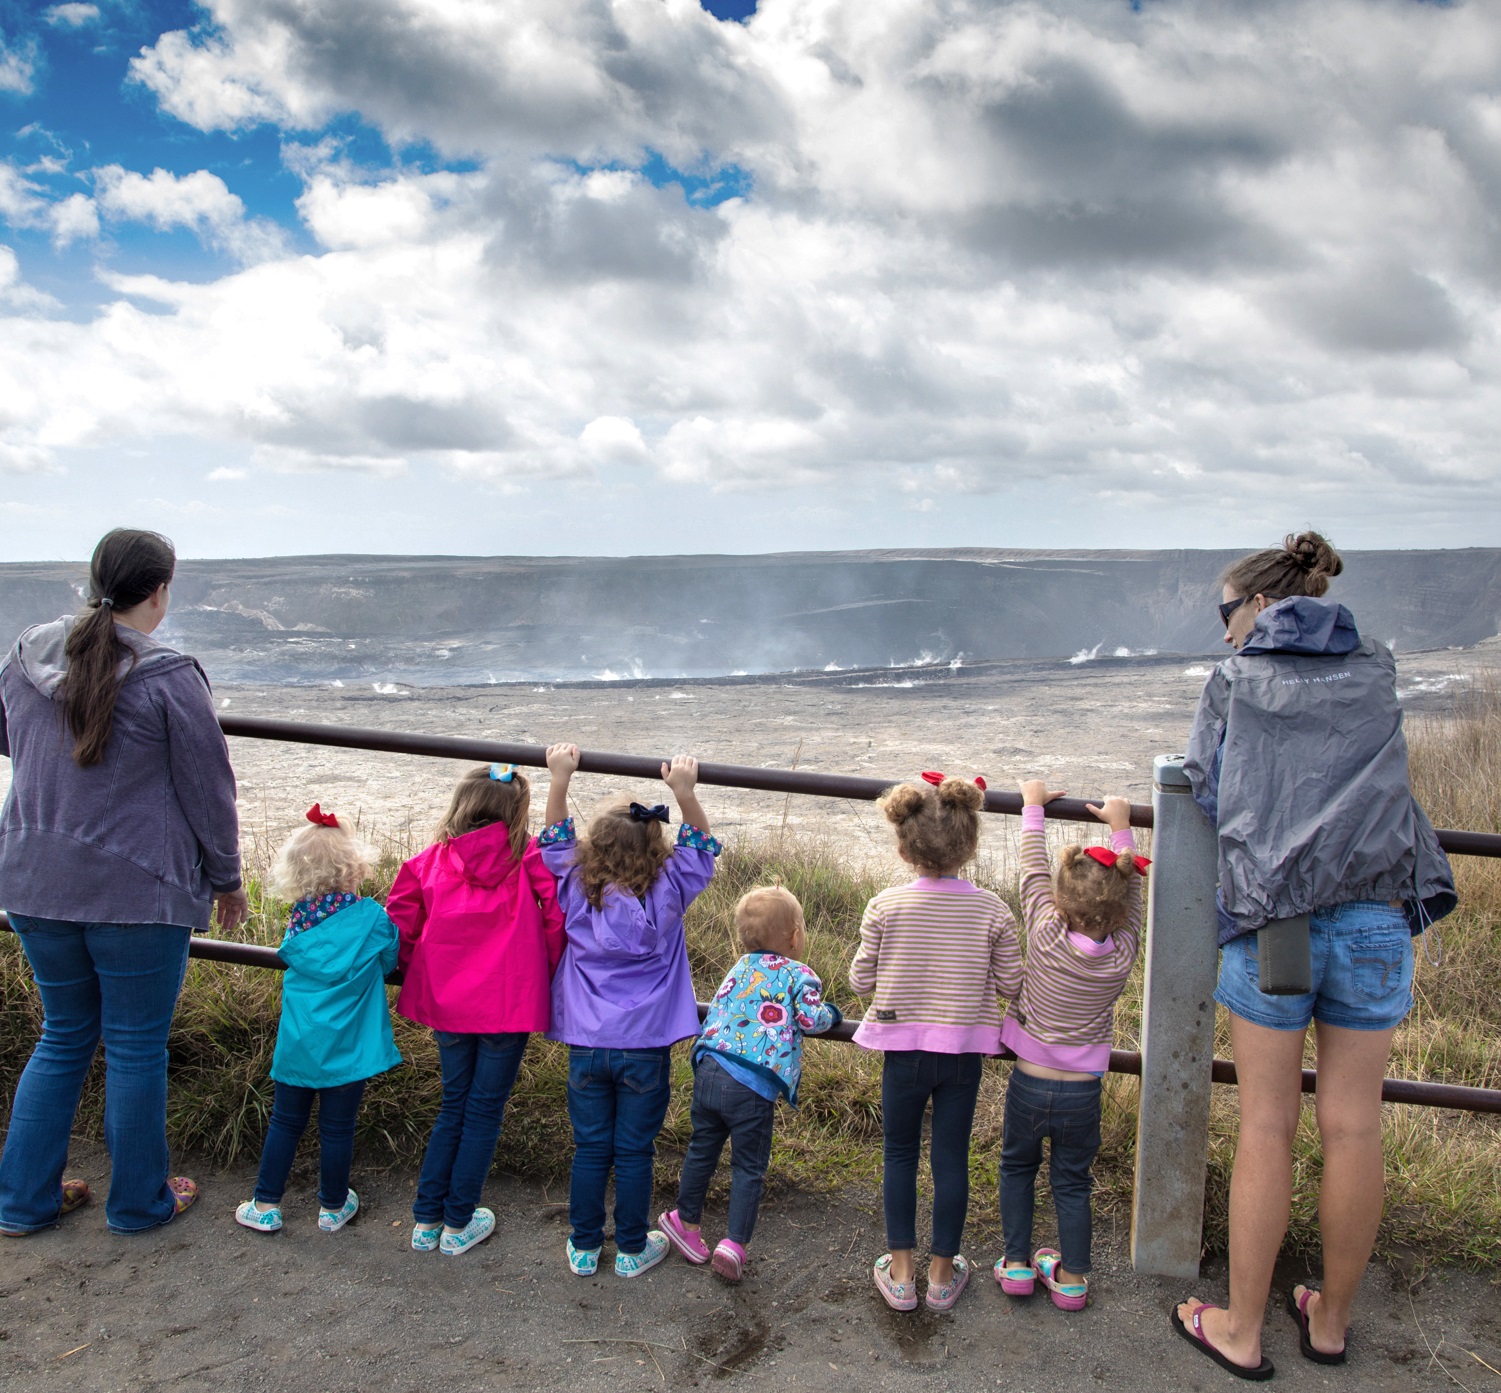 Young children and two adults stand at an overlook on the rim of a steaming volcano